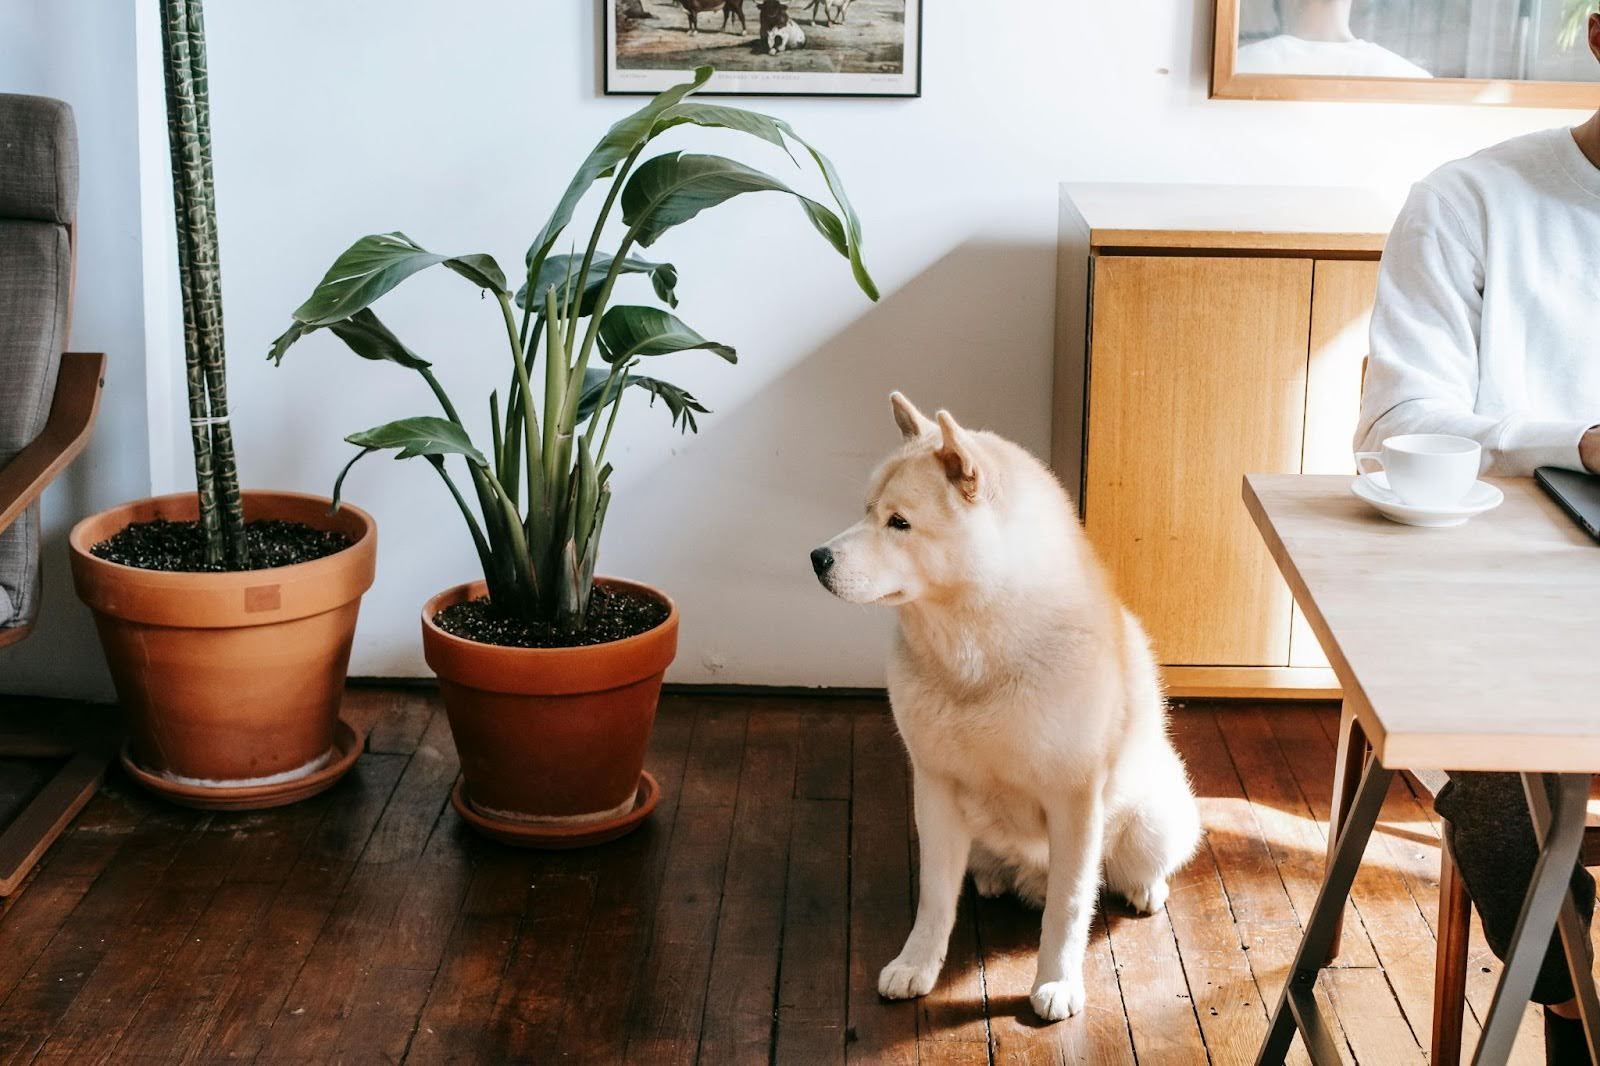 A dog is sitting on the floor next to a potted plant in a living room.